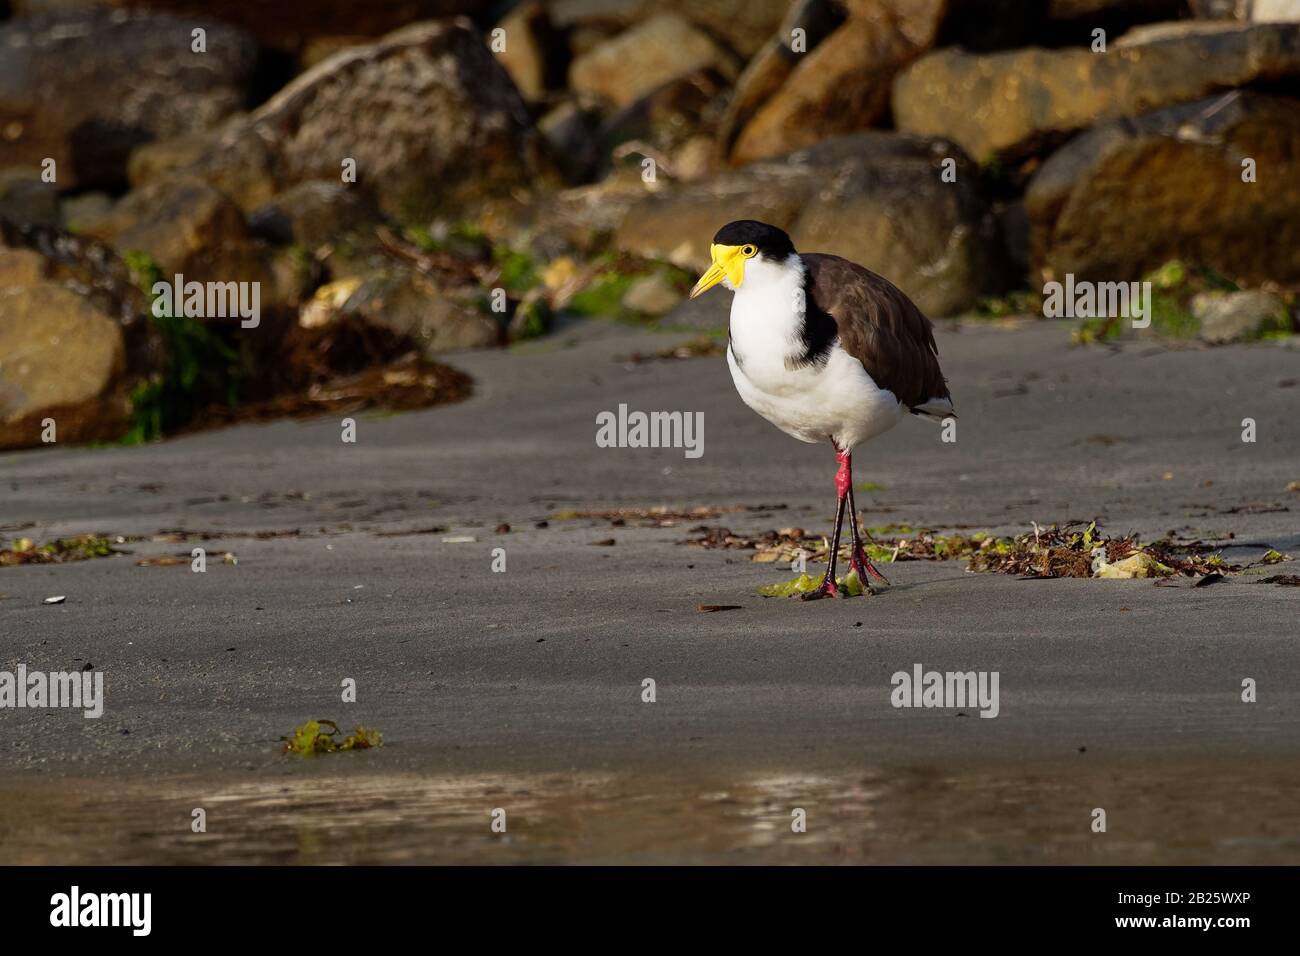 Vanellus miles - Masked Lapwing, wader from Australia and New Zealand. Shore bird with yellow beak, brown back and wings and red legs staying in the w Stock Photo